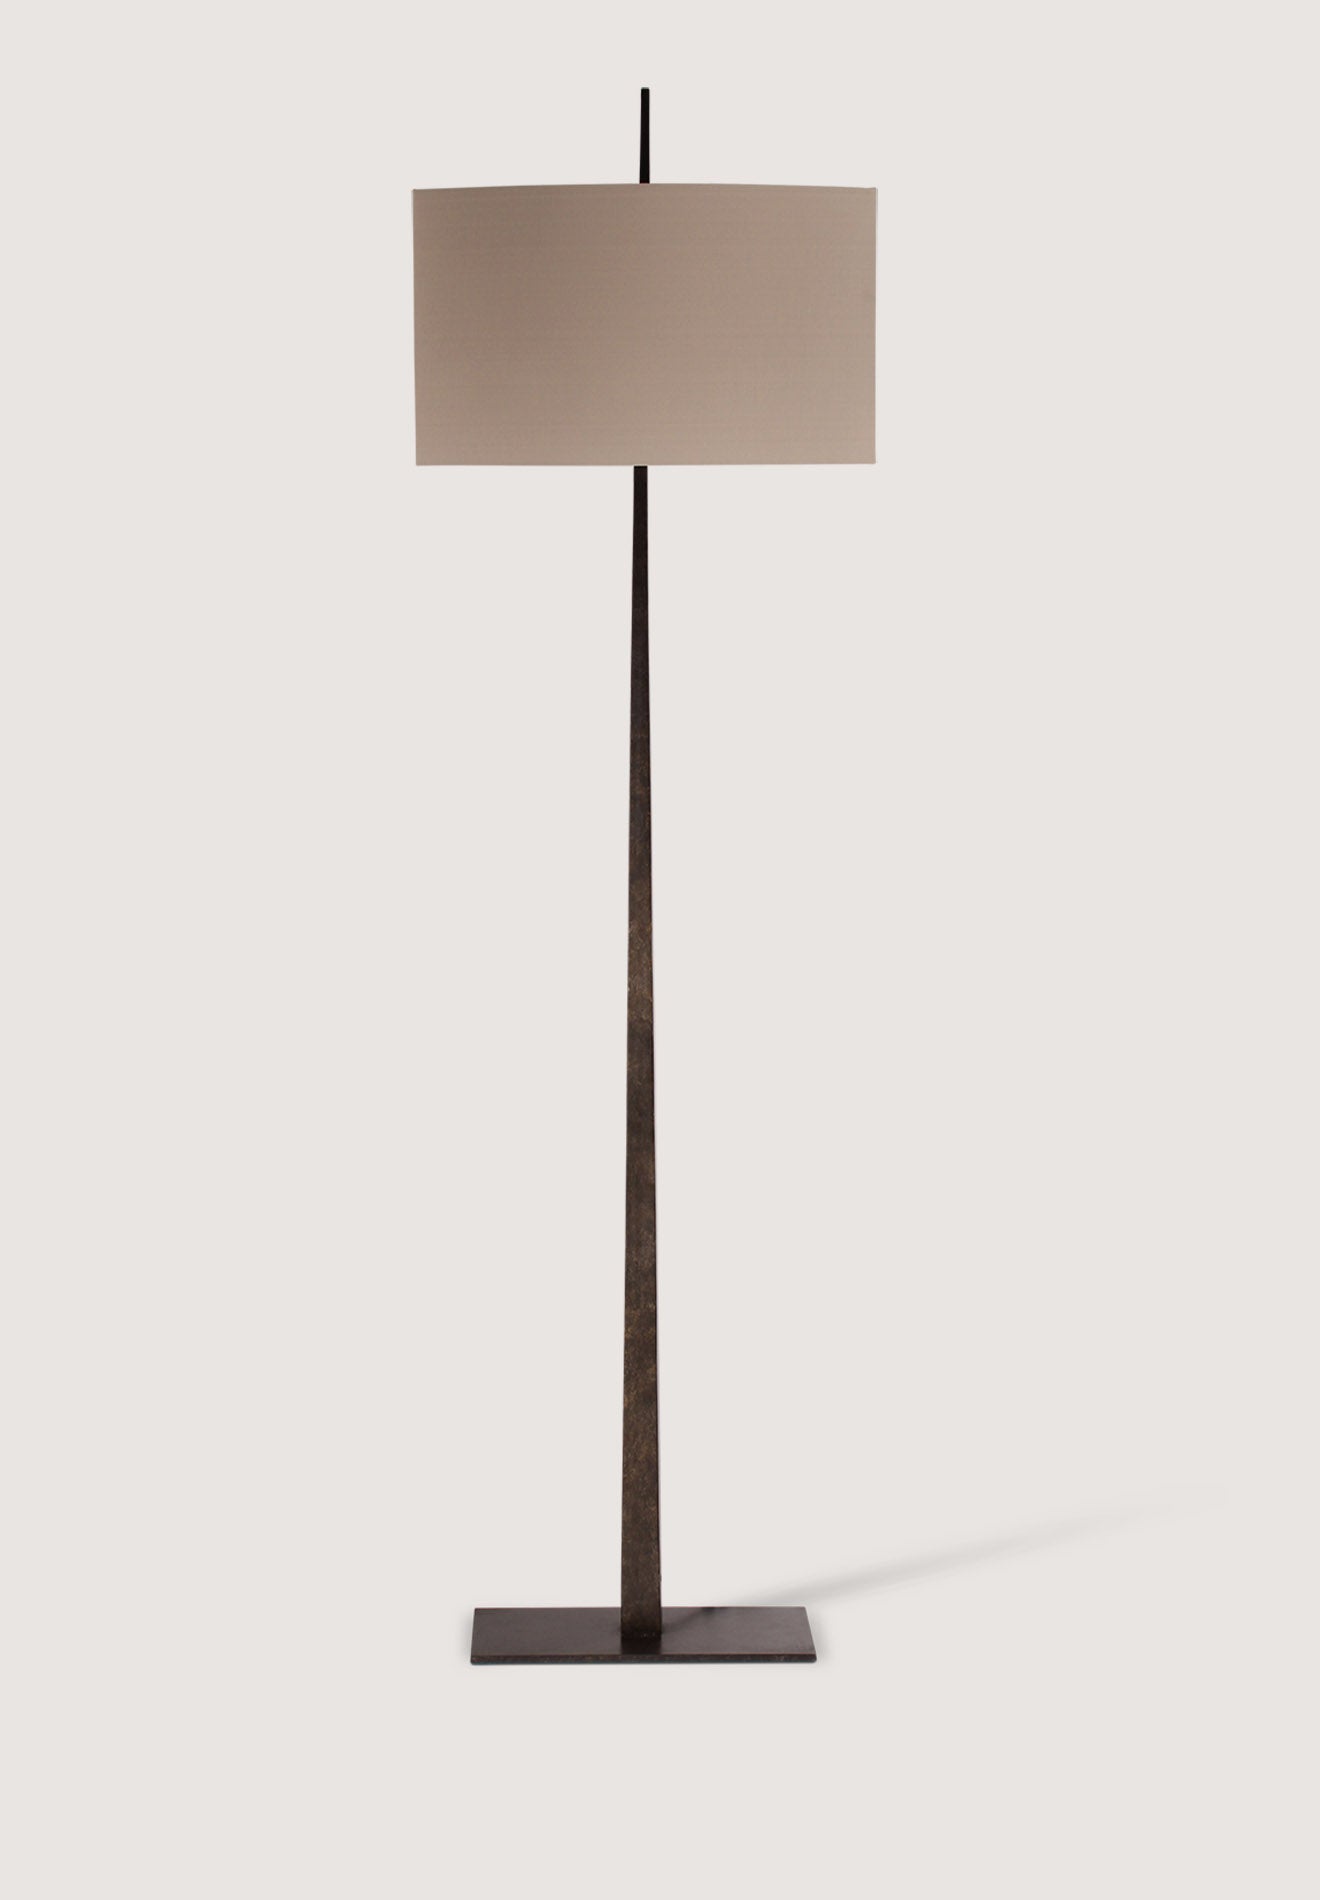 Bronzed shown with 22" Tall Eye, Supplied with Champagne Or Frosted Perspex Baffle in Putty Silk with Cream Card lining